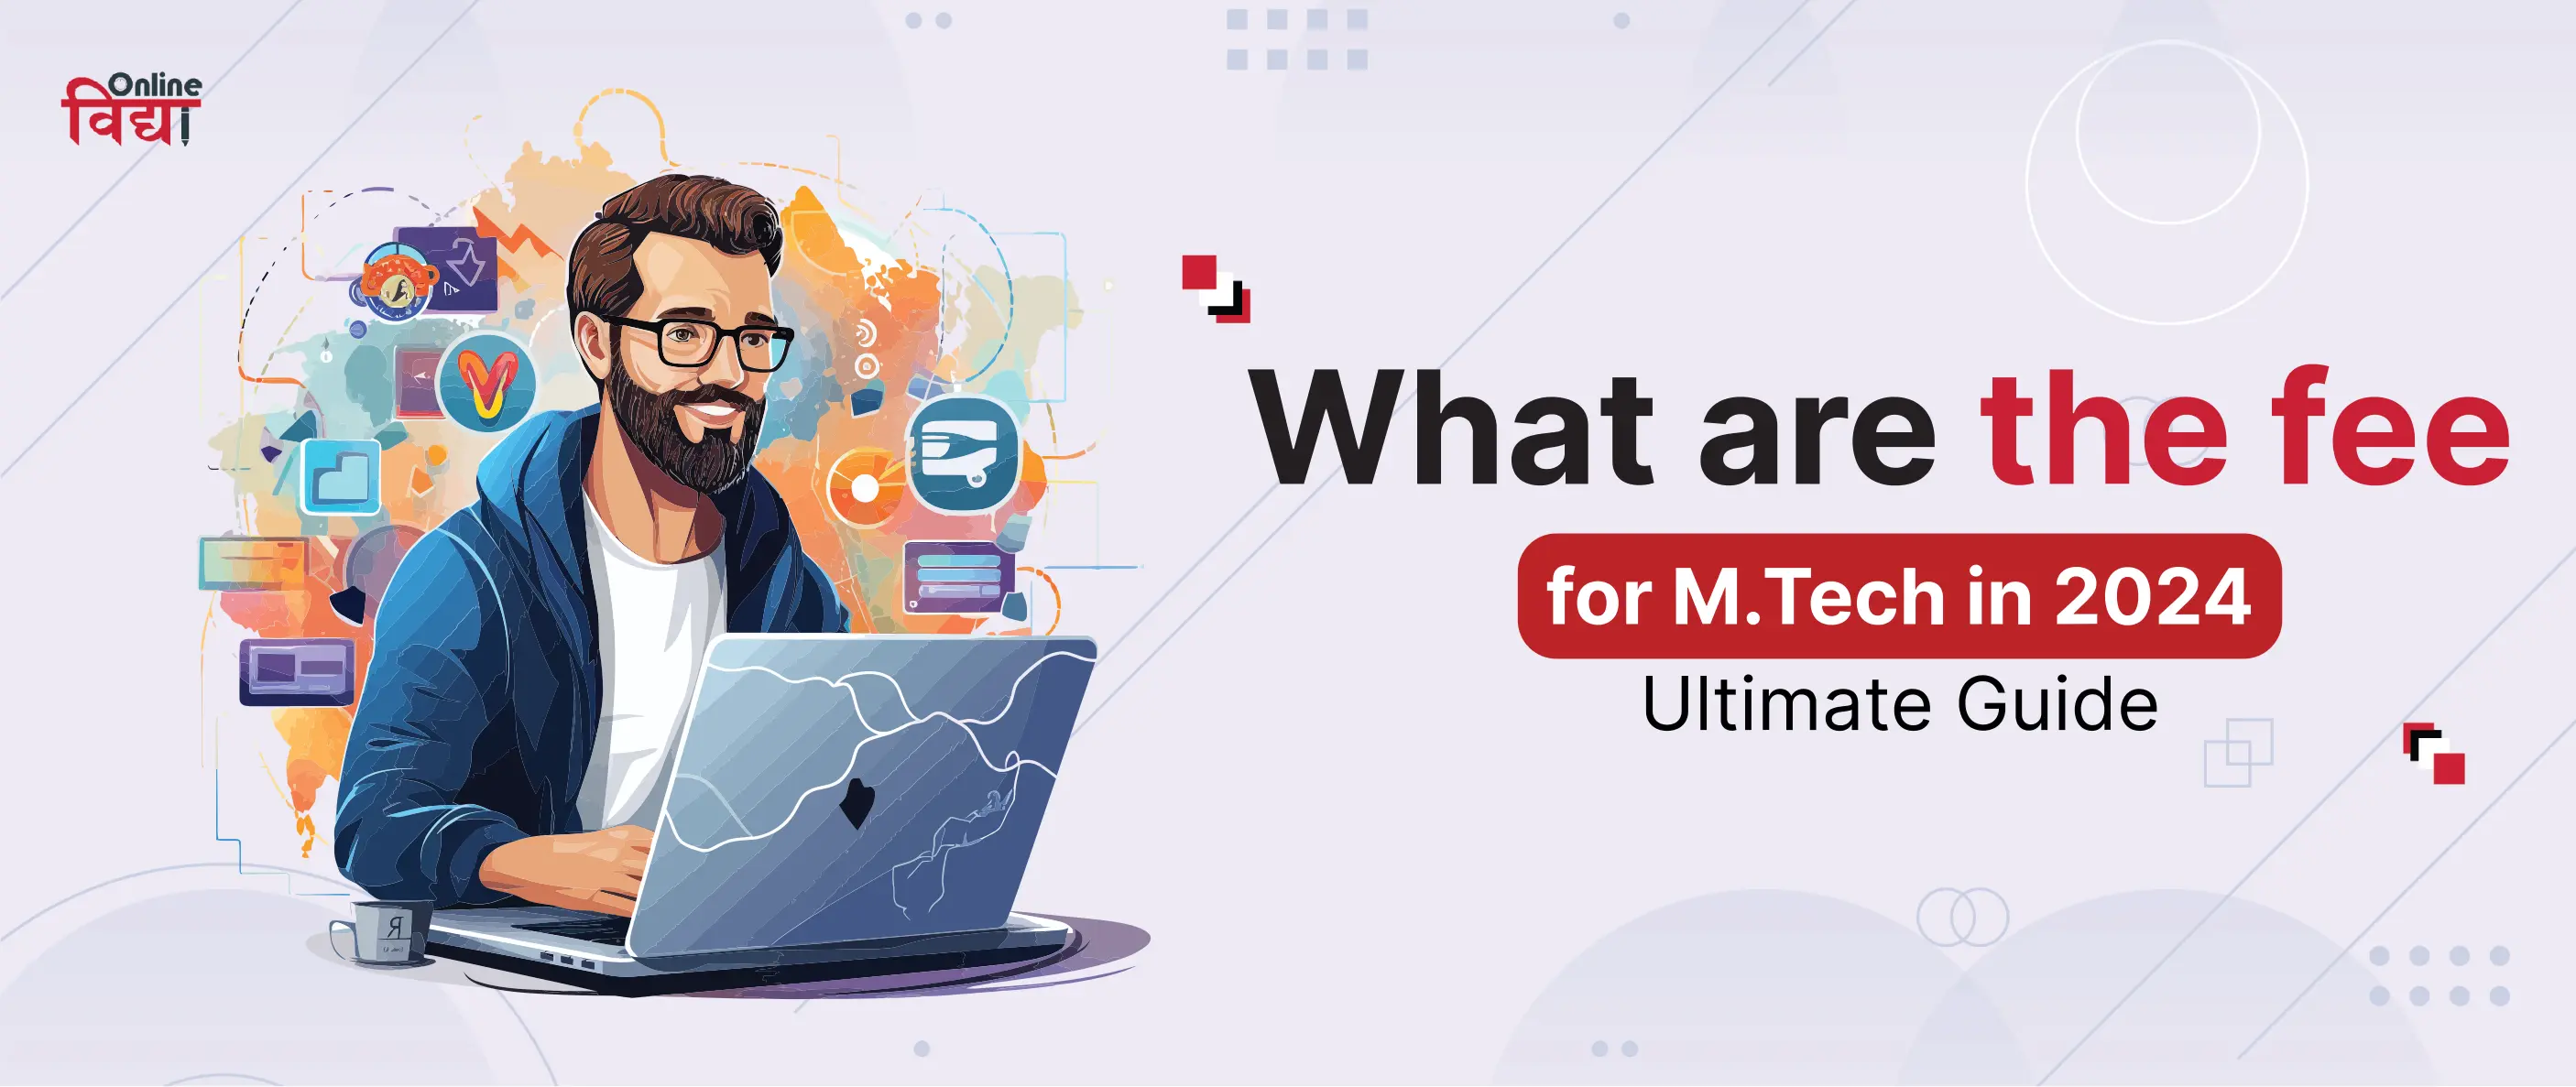 What are the fees for M.Tech in the 2024 Ultimate Guide?